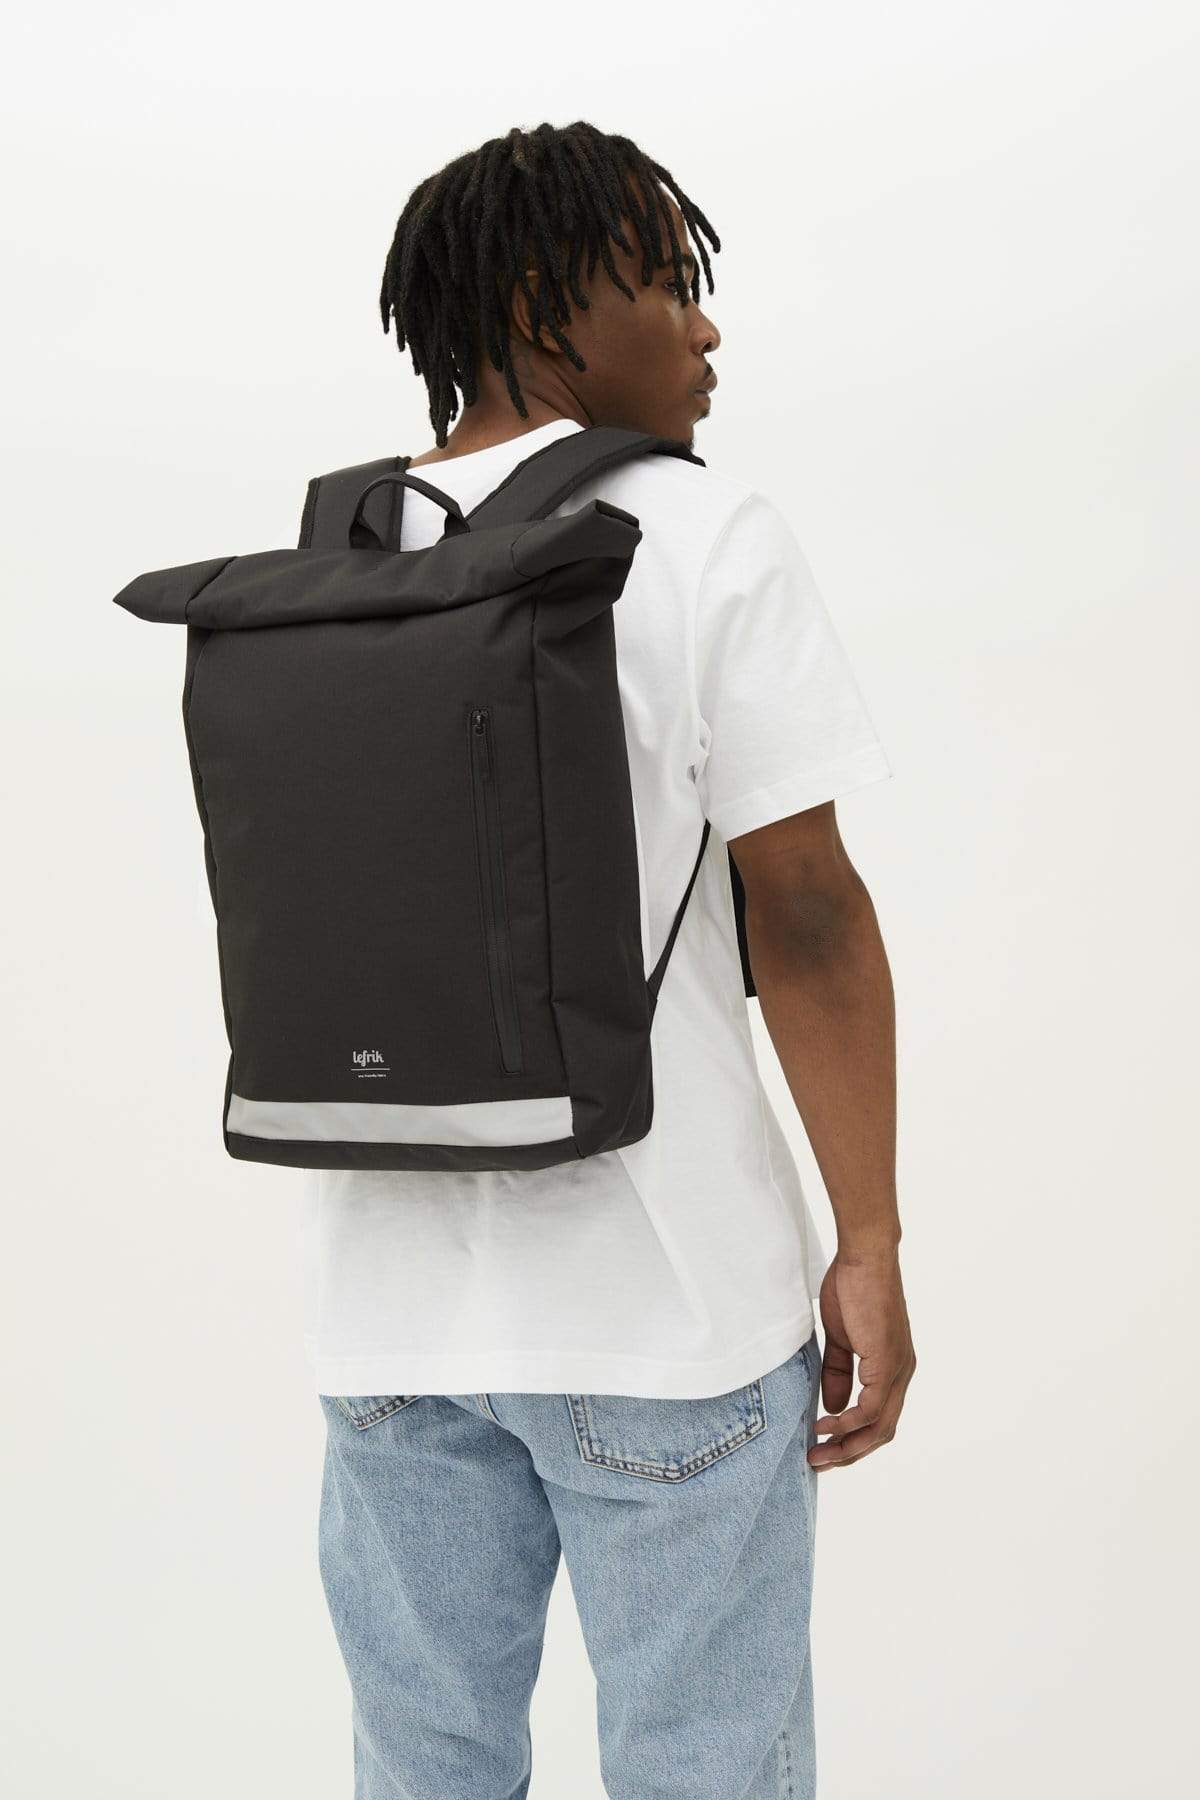 Lefrik Roll Reflective Backpack-Accessories-Ohh! By Gum - Shop Sustainable